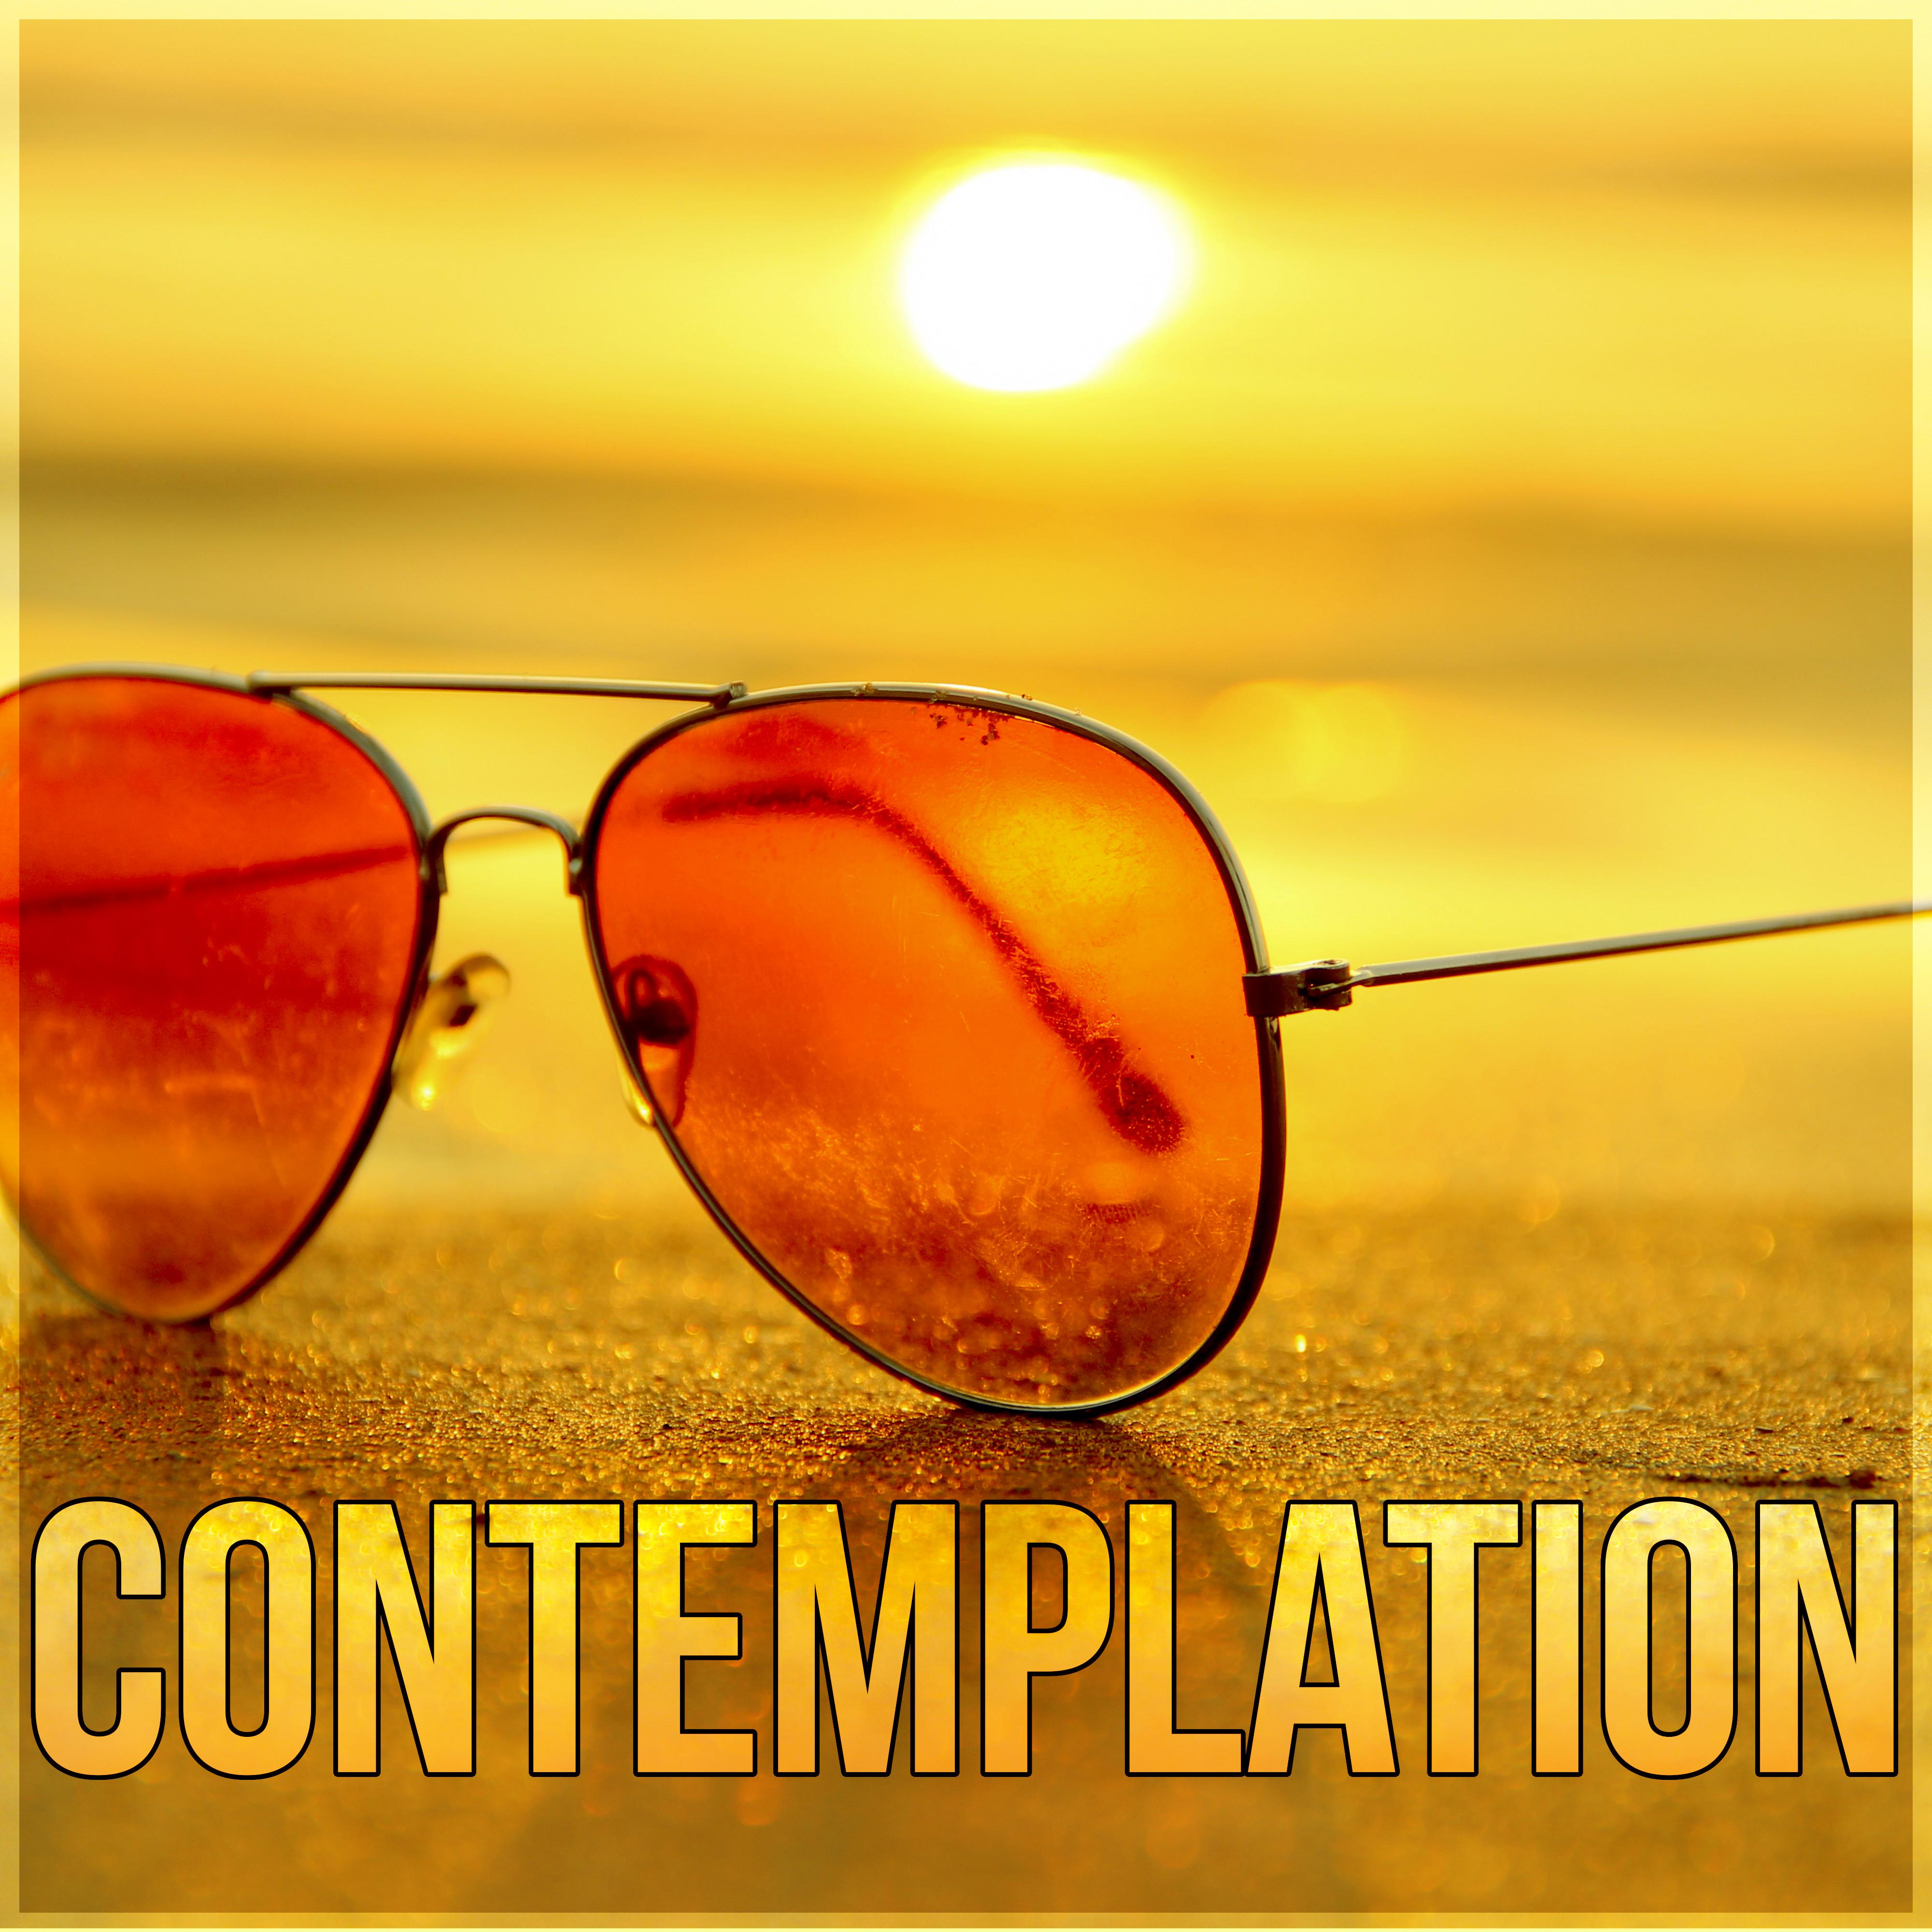 Contemplation – Music for Relaxation, Yoga Meditation & Sound Therapy, Nature Sounds for Stress Reduction, Tranquility SPA in Wellness Center